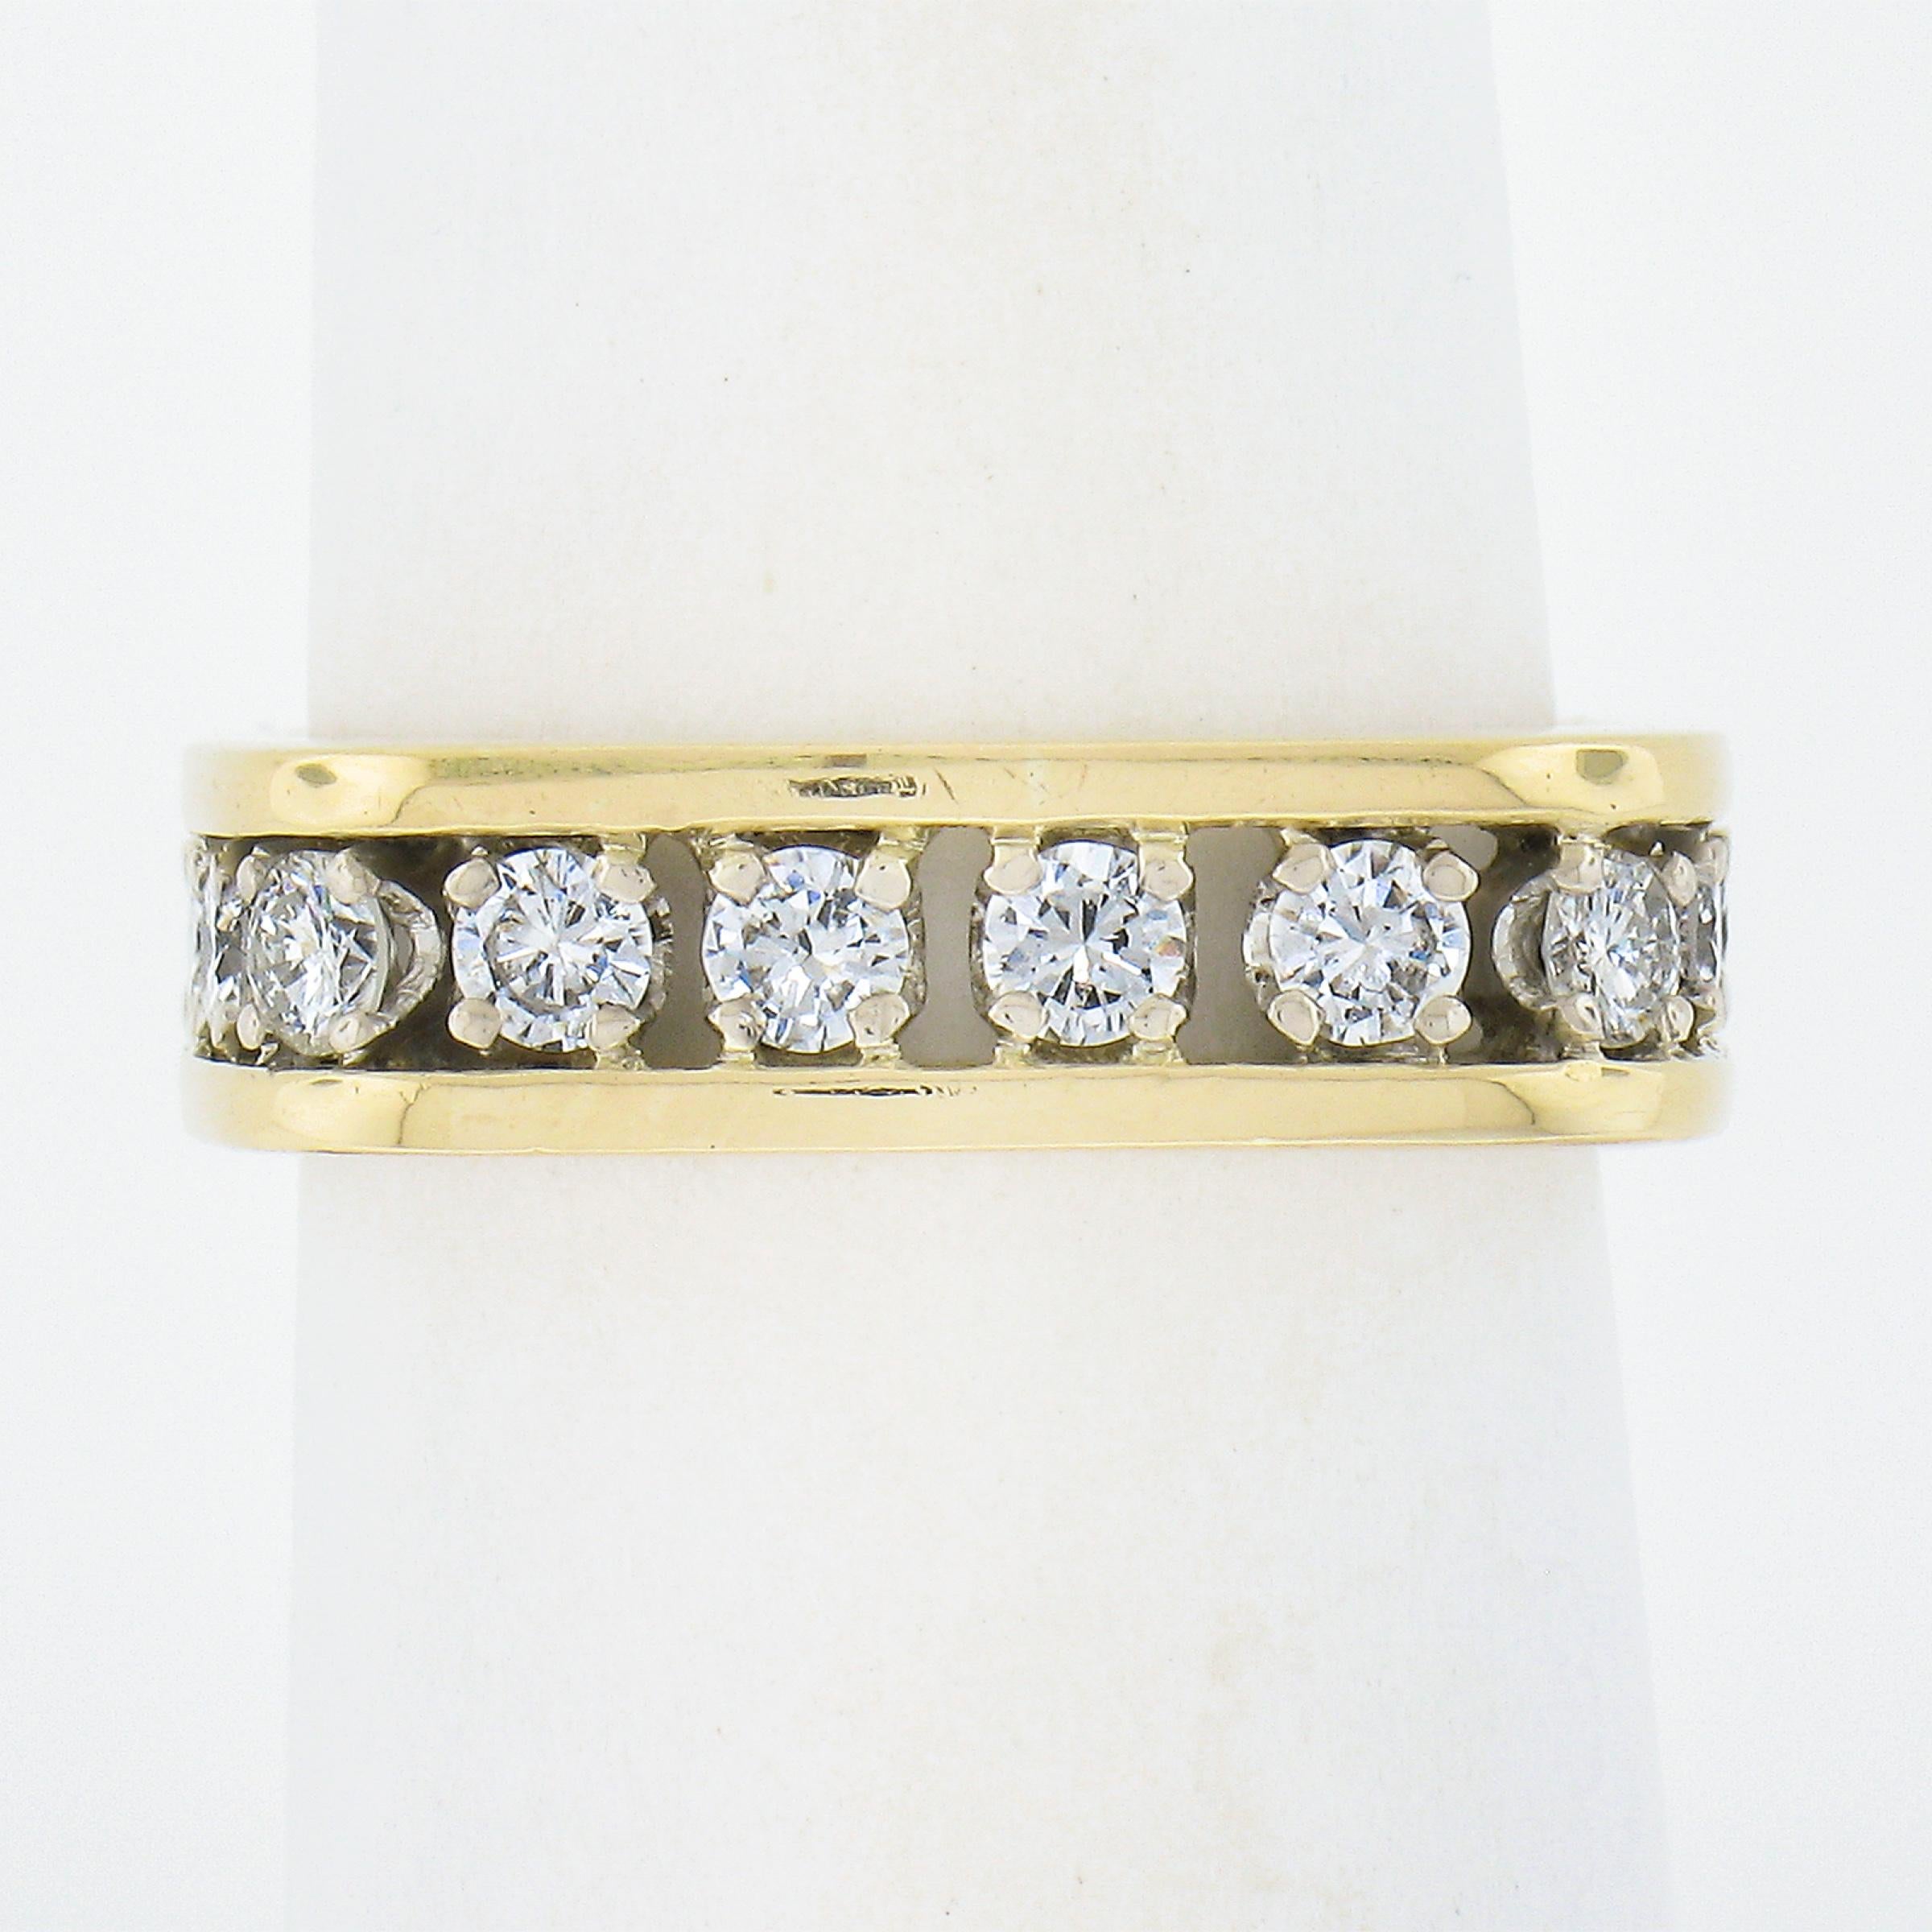 --Stone(s):--
(20) Natural Genuine Diamonds - Round Brilliant Cut - Channel Set - G/H Color - VS1/VS2 Clarity
Total Carat Weight:	1.40 (exact)

Material: 14k Solid Yellow Gold 
Weight: 6.62 Grams
Ring Size: 7 (Fitted on a finger. We can NOT custom